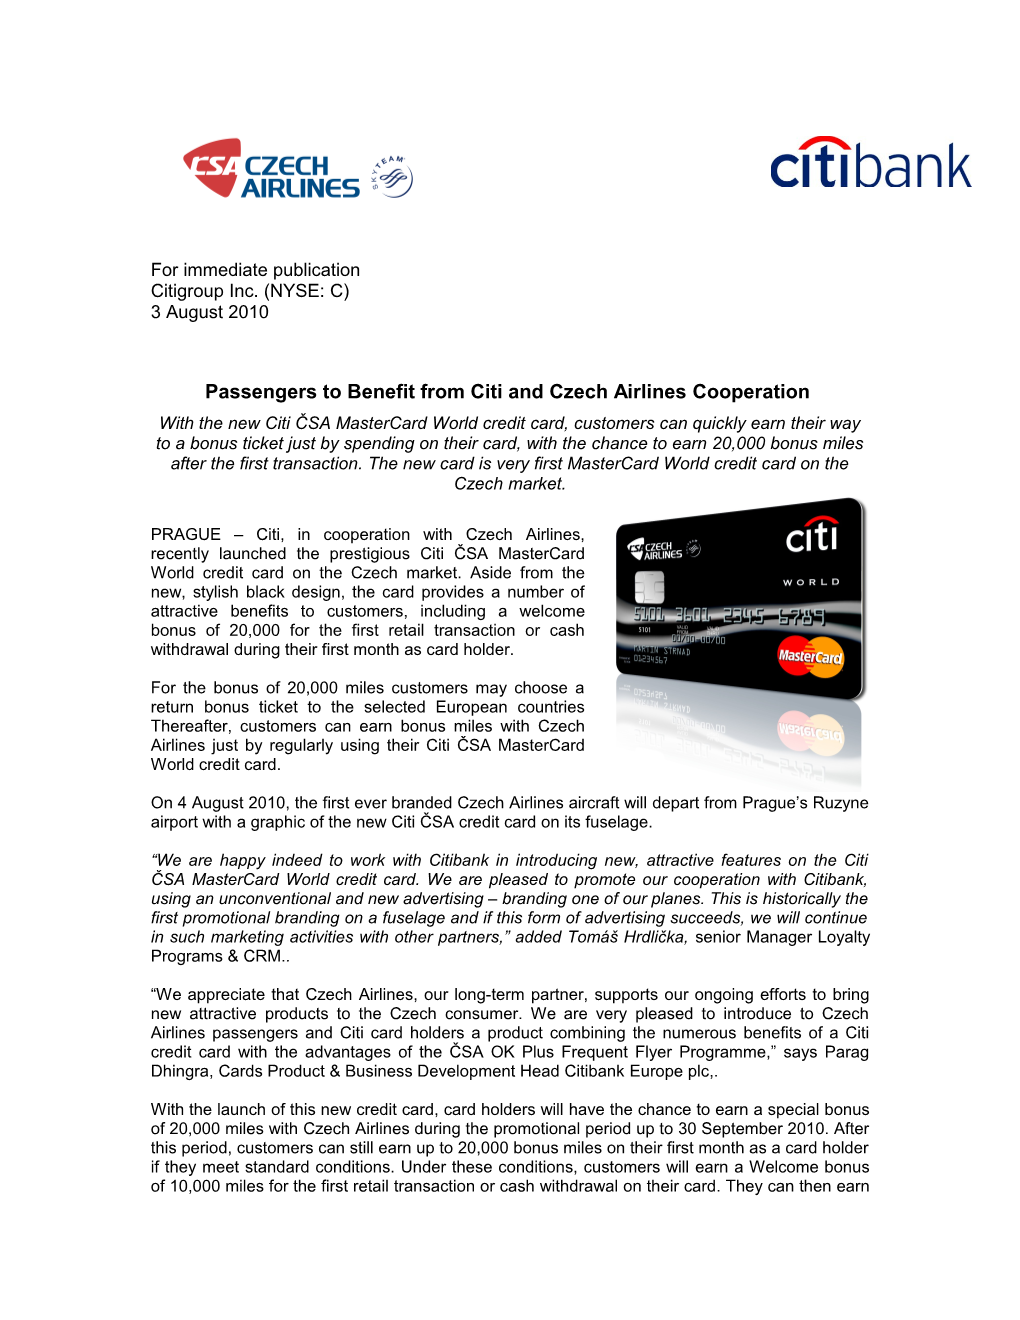 Passengers to Benefit from Citi and Czech Airlines Cooperation